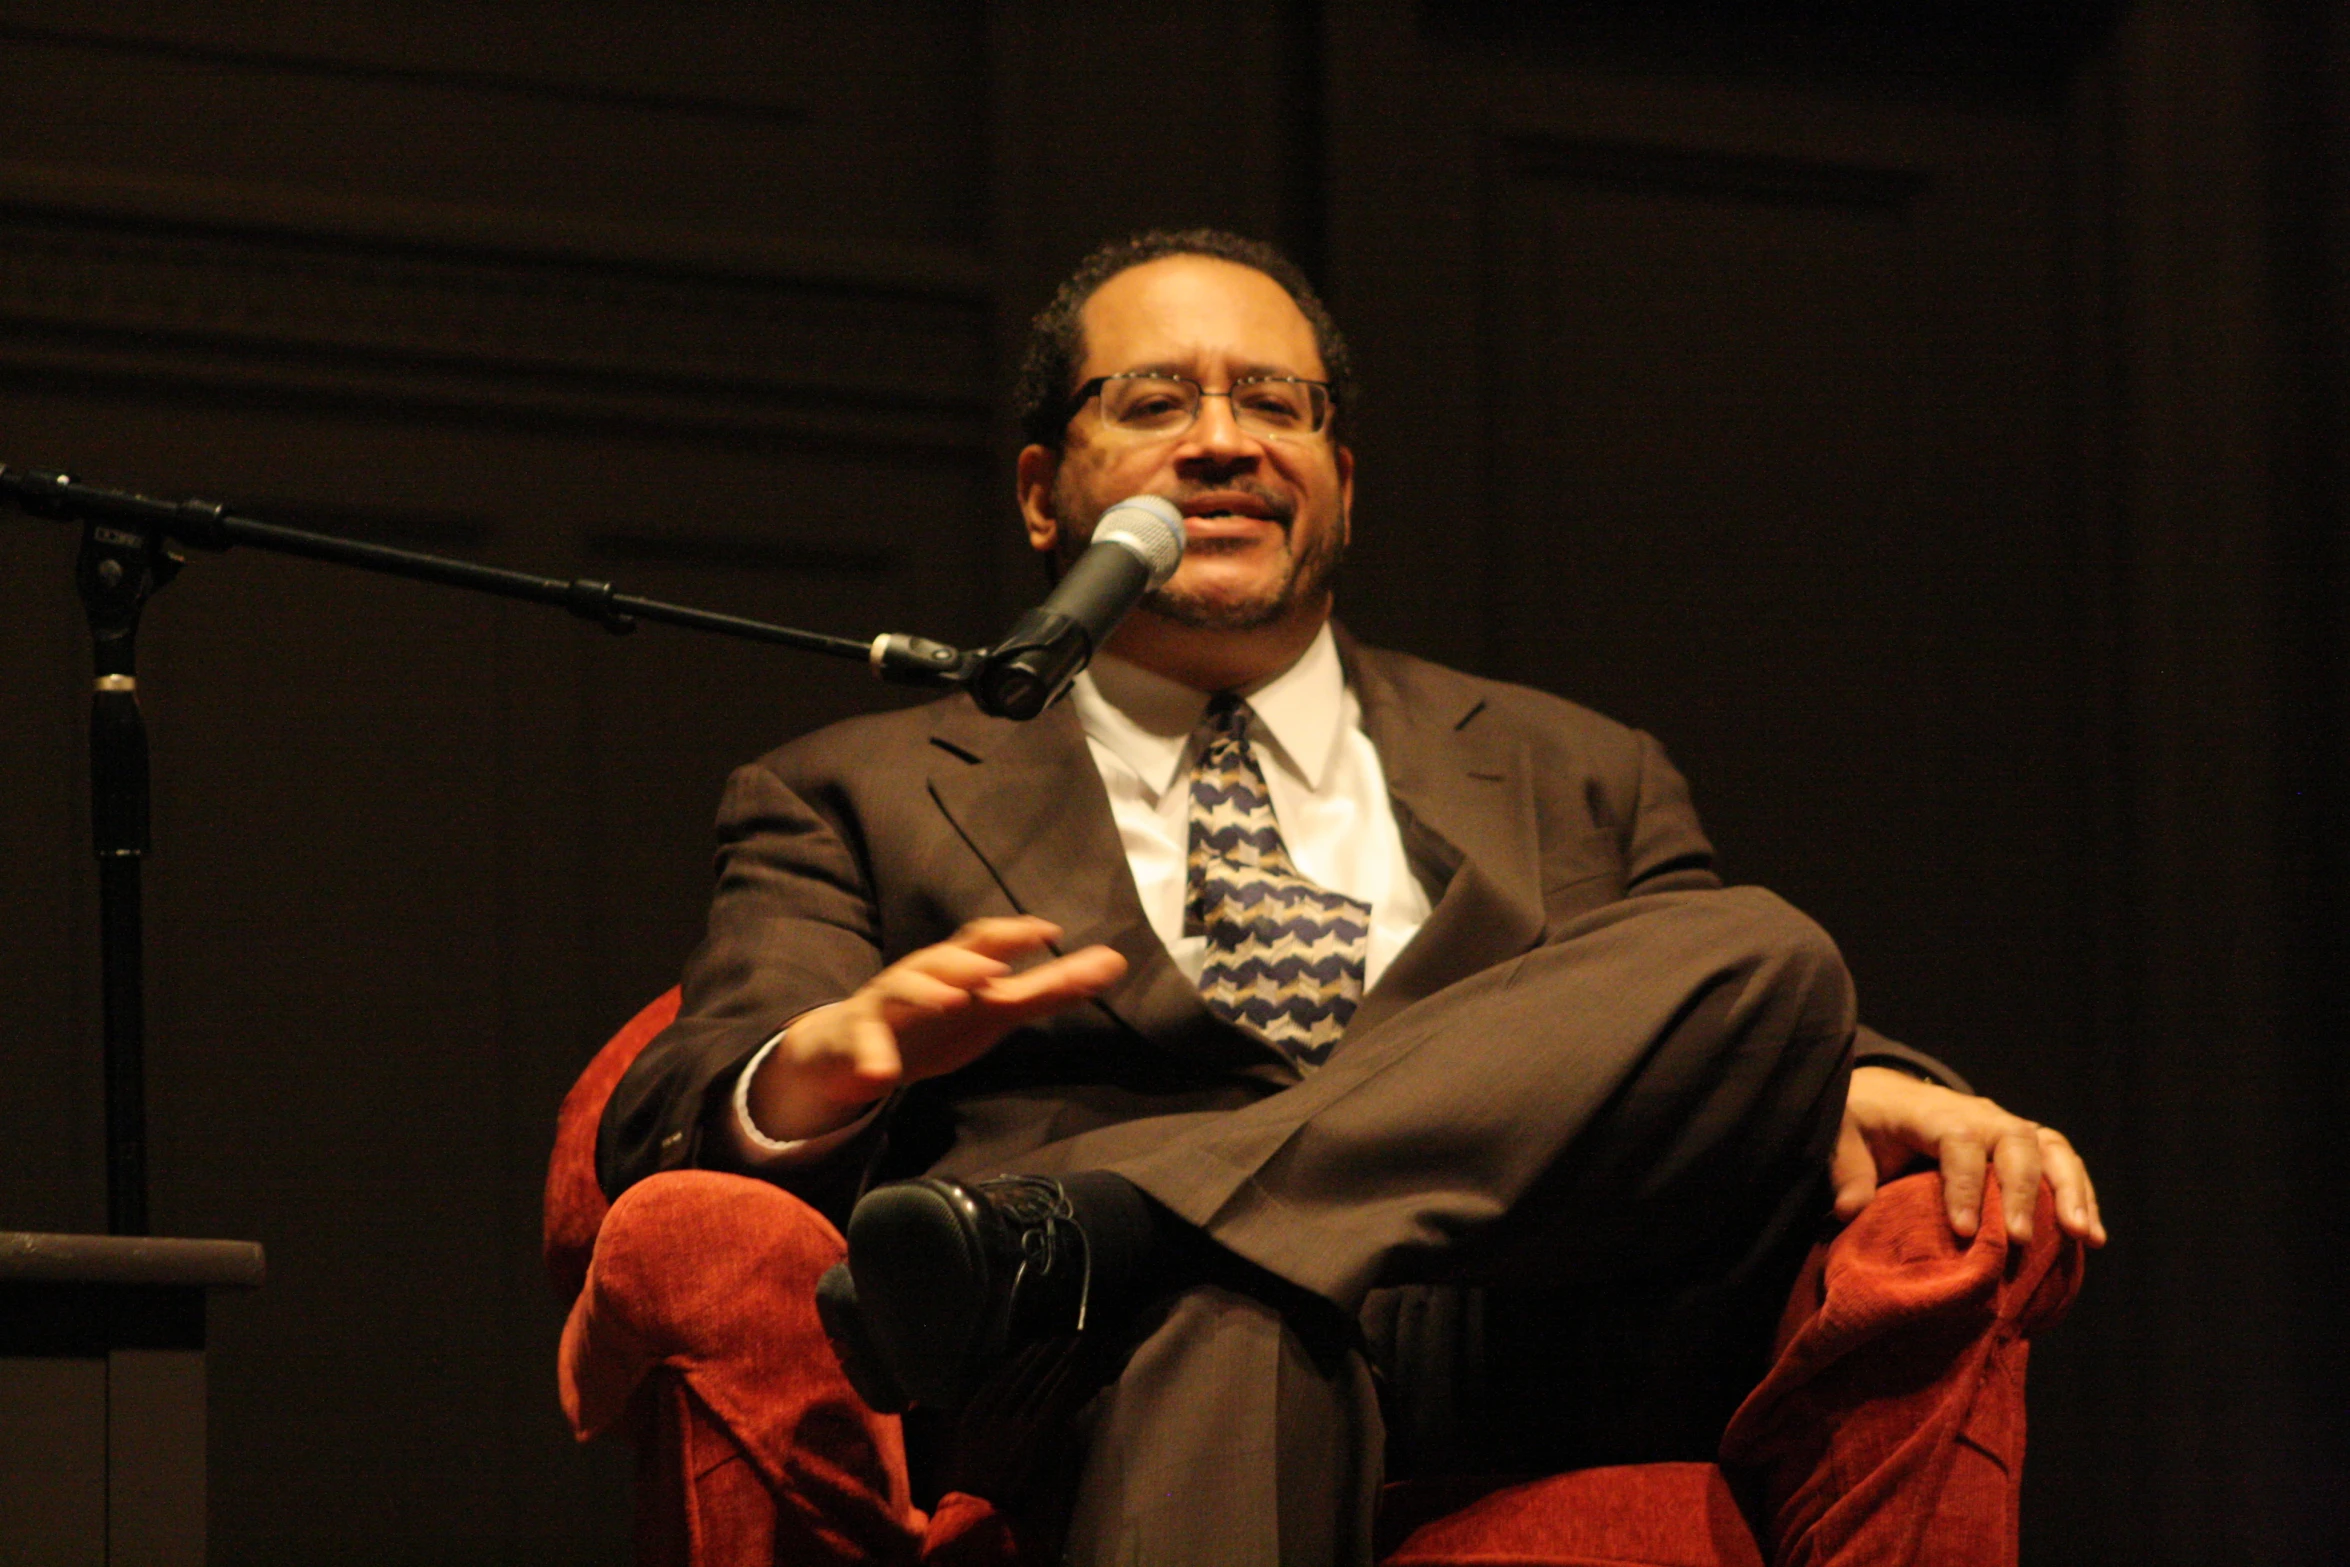 a man with glasses and a tie sitting in a chair